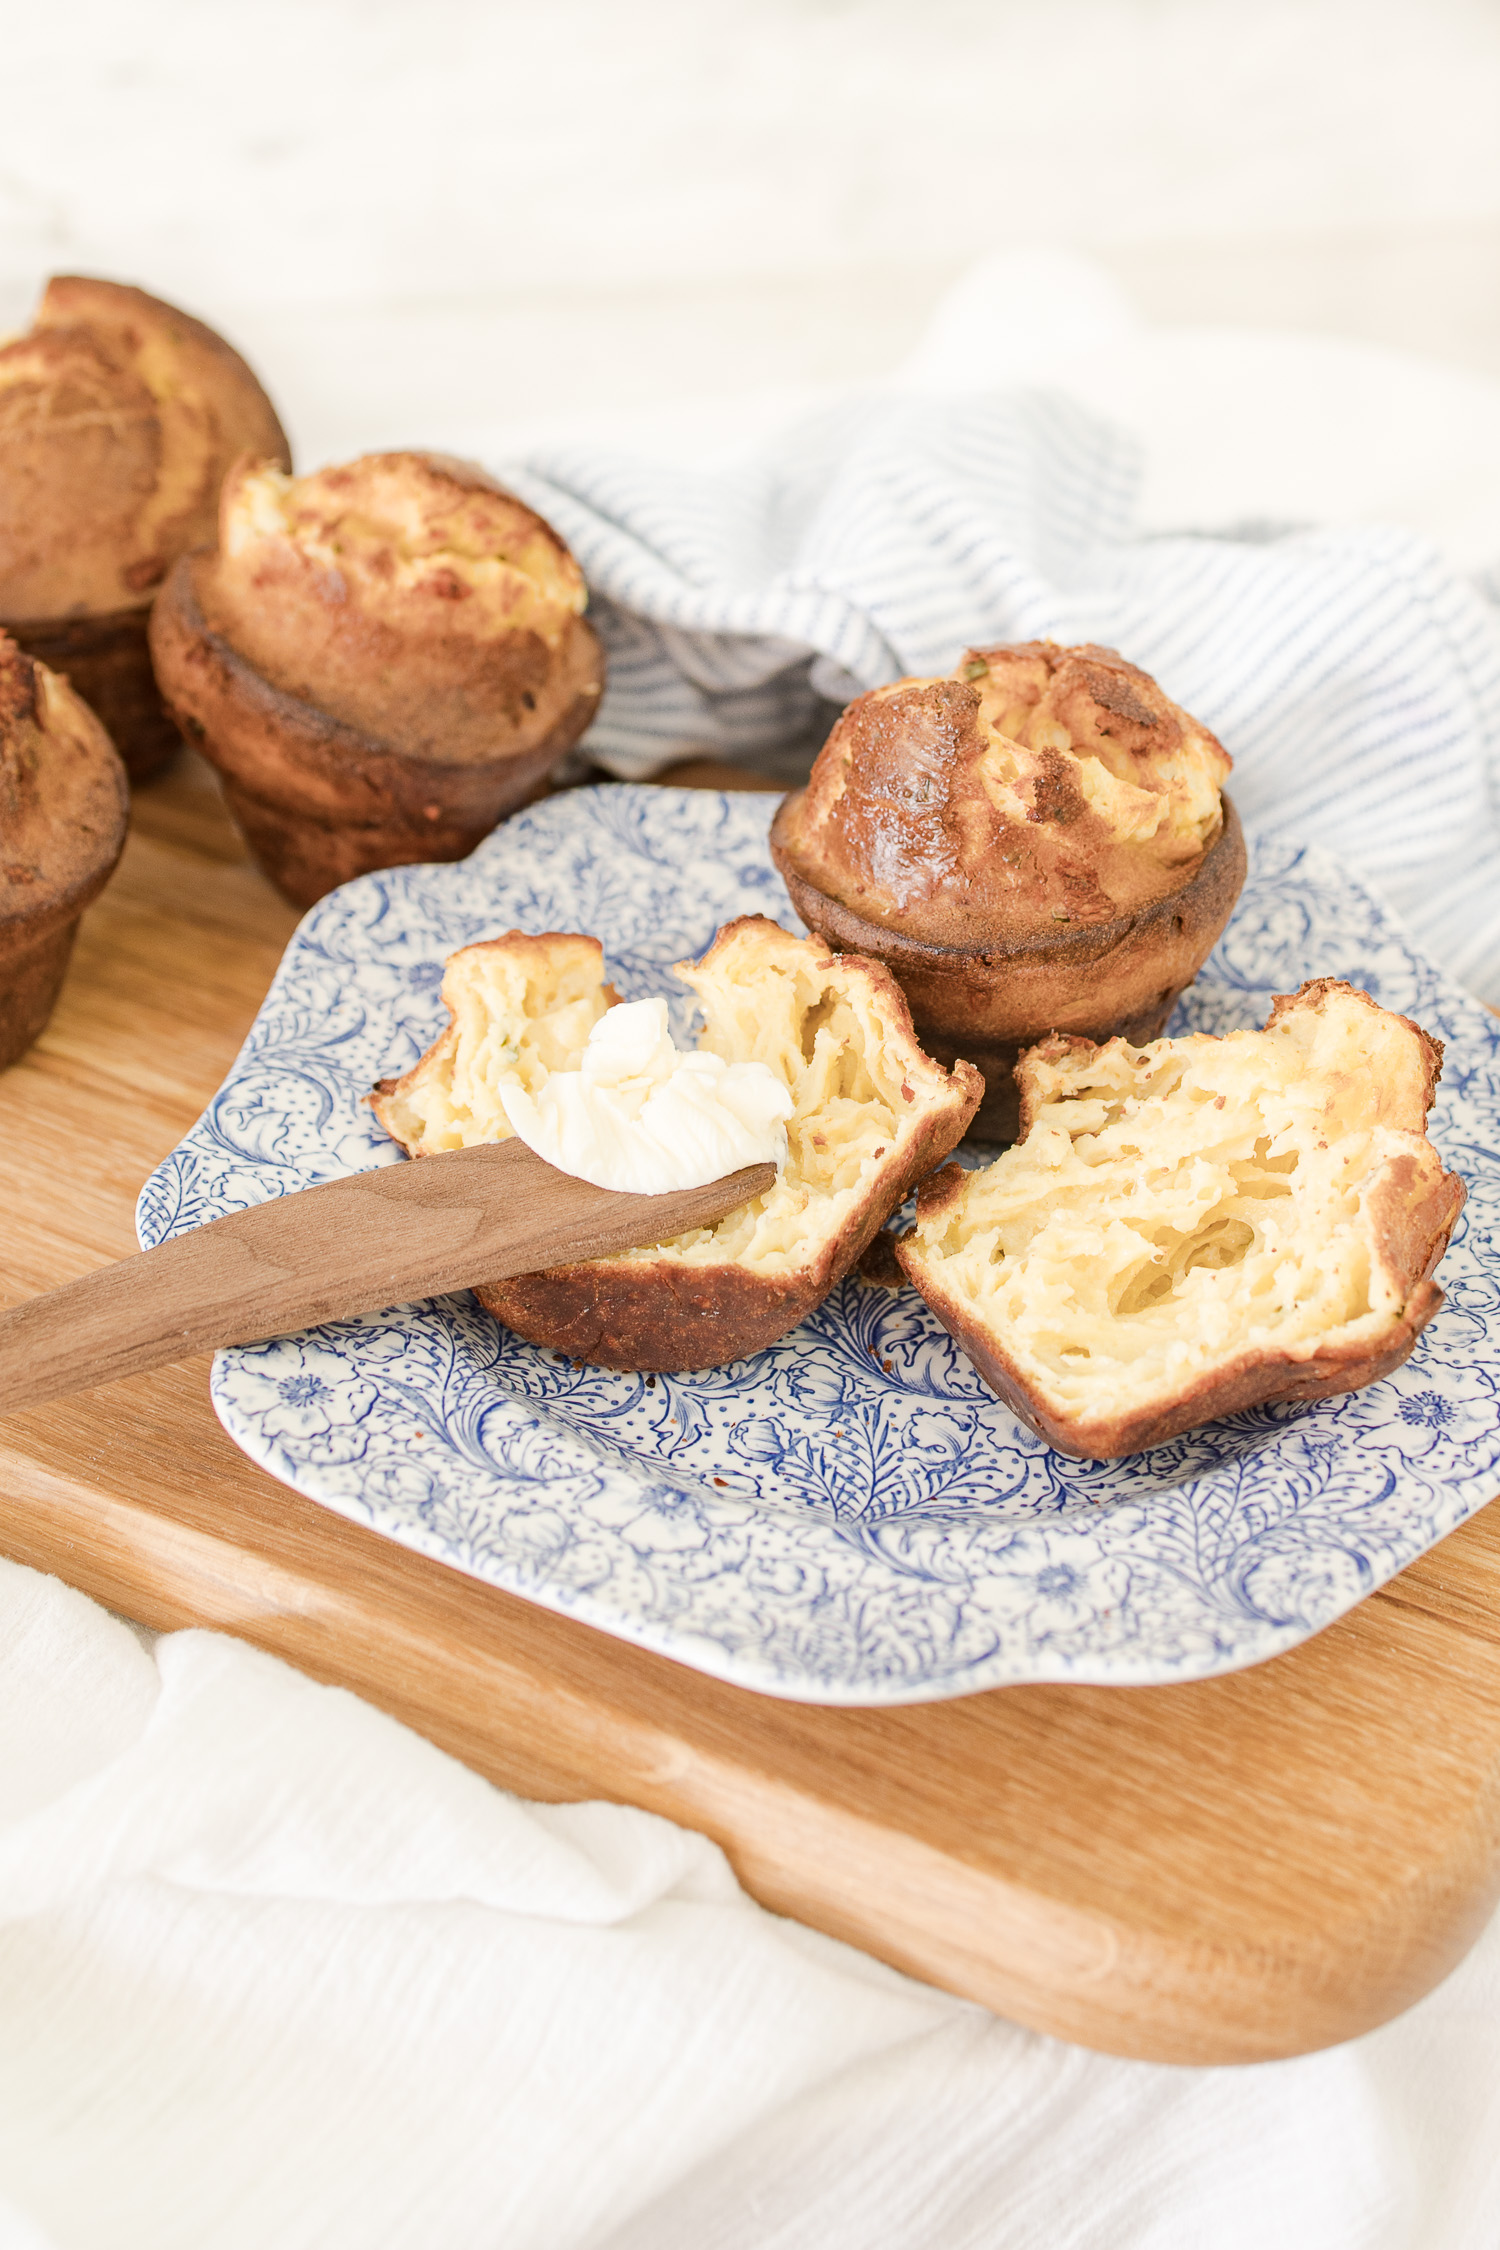 popover cut open with wooden knife with butter